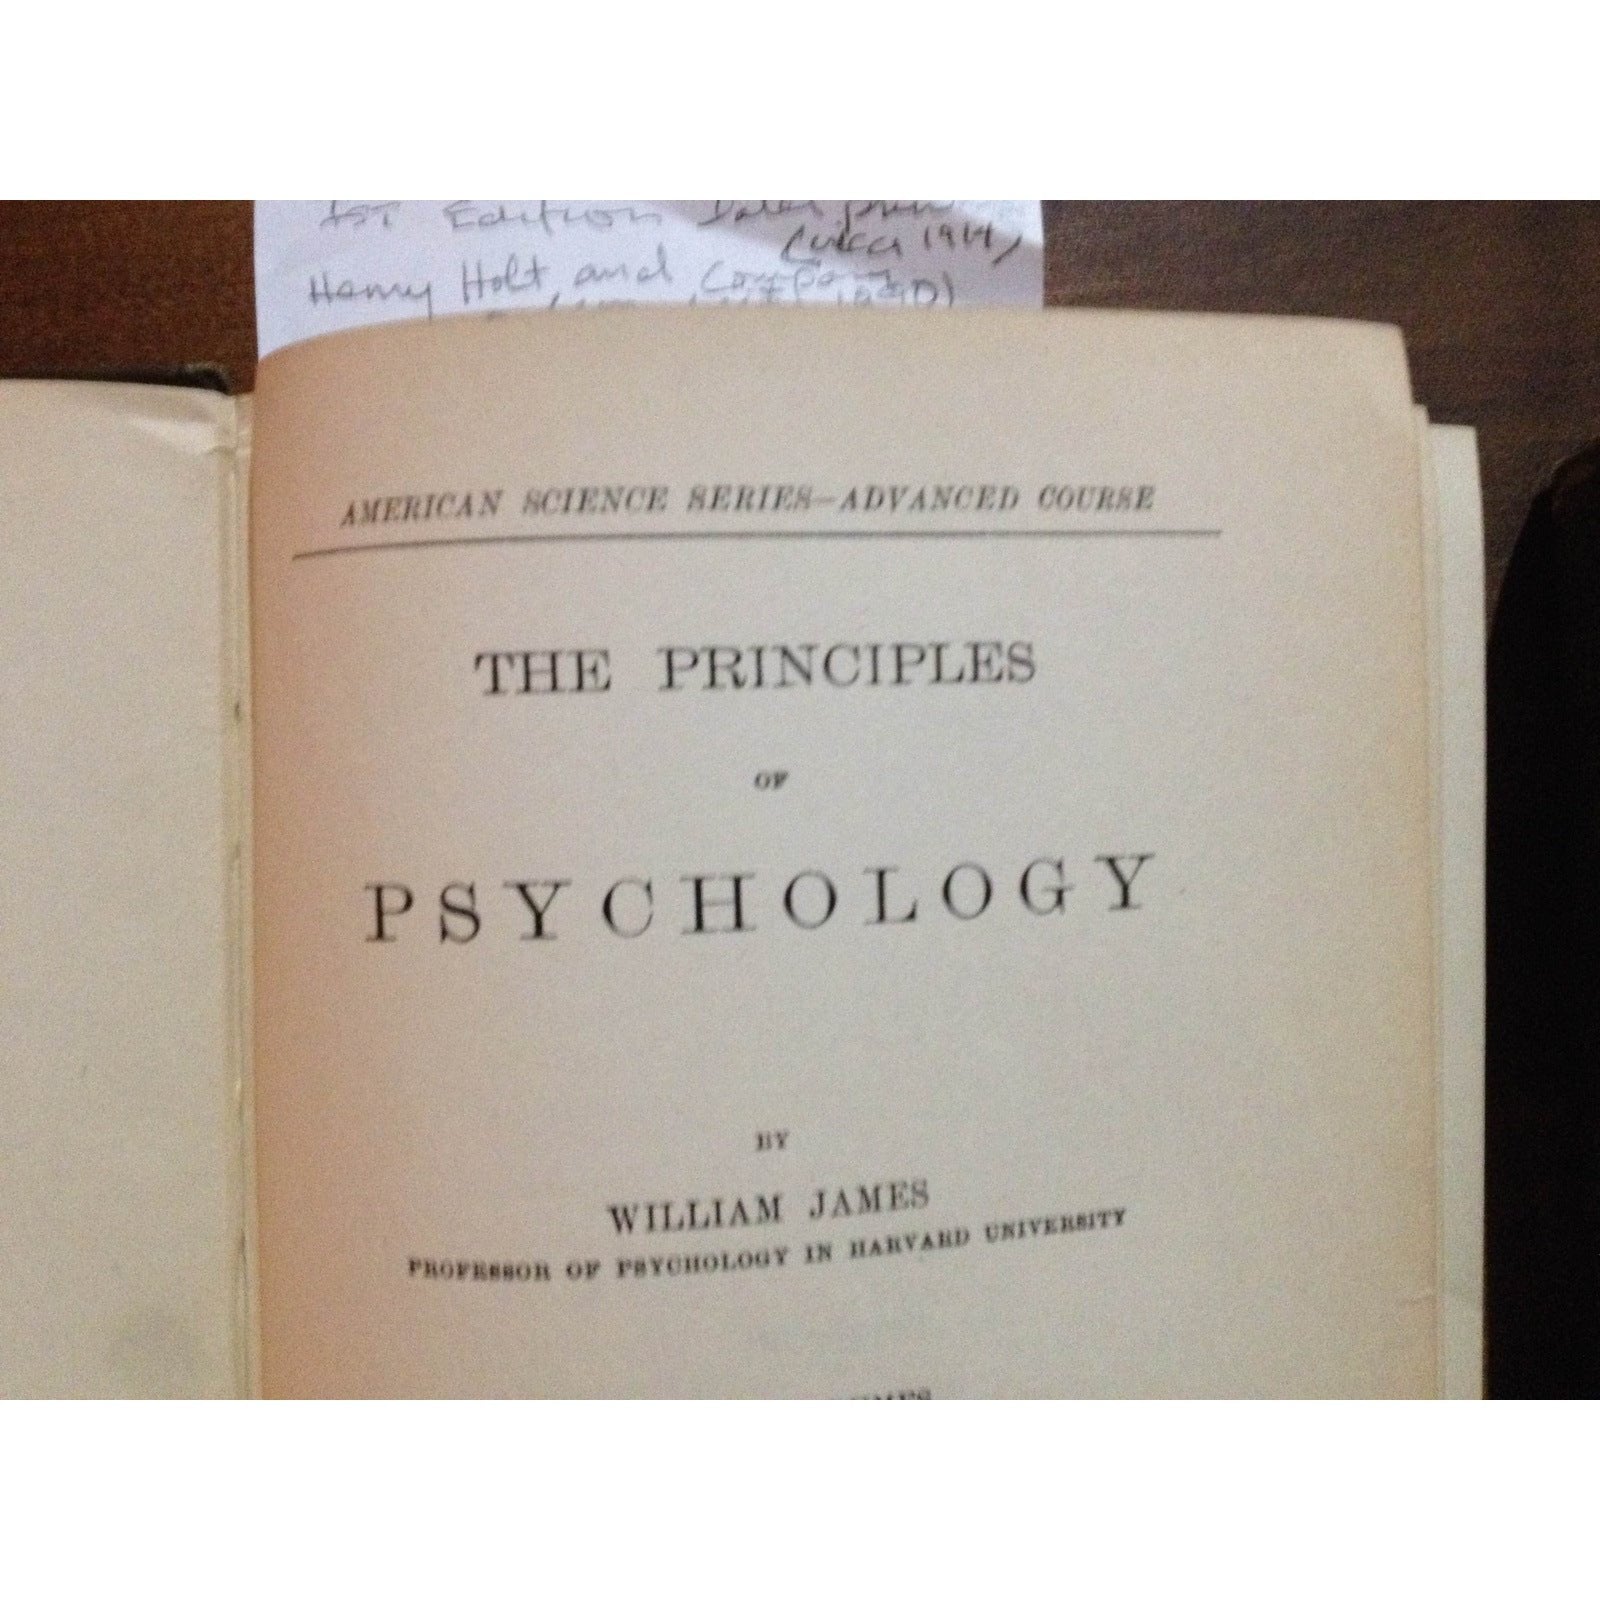 THE PRINCIPLES OF PSYCHOLOGY  BY:  WILLIAM JAMES [2 VOL] BooksCardsNBikes